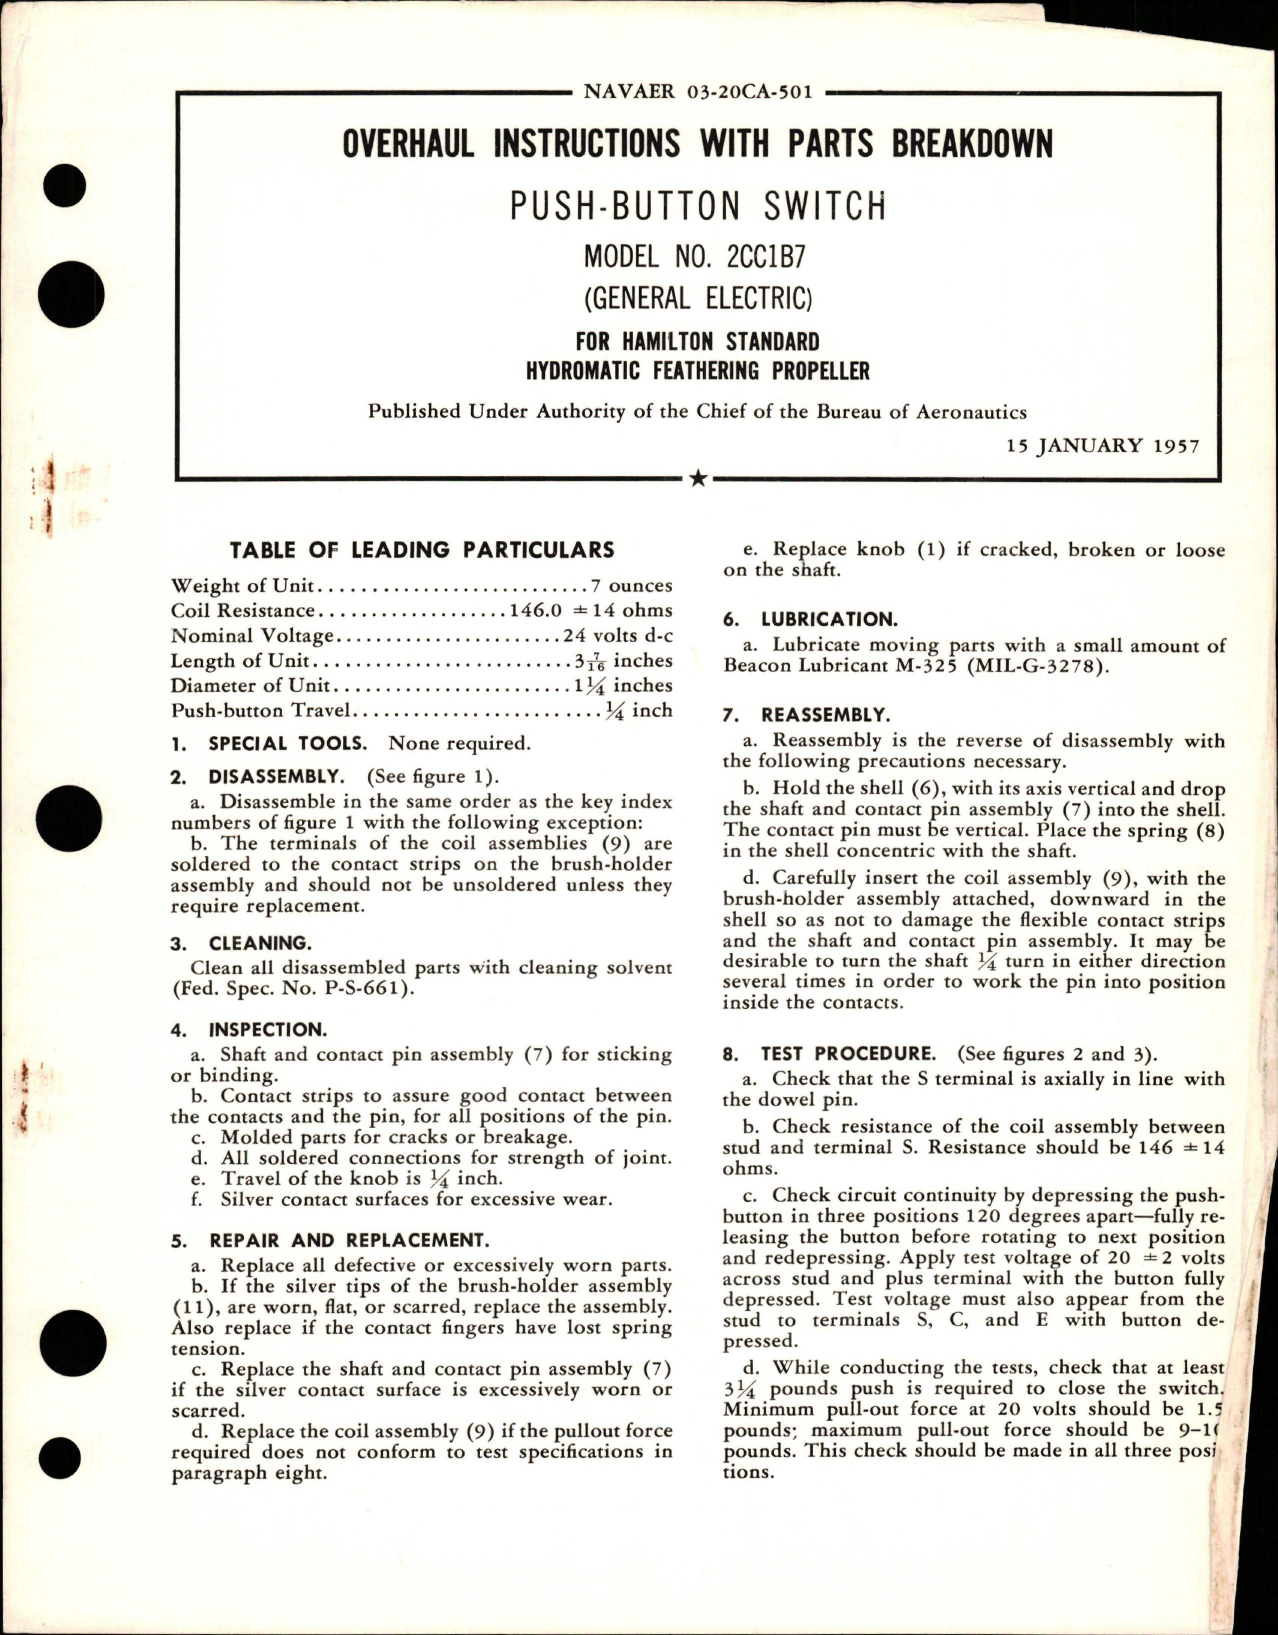 Sample page 1 from AirCorps Library document: Overhaul Instructions with Parts Breakdown for Push Button Switch - Model 2CC1B7 